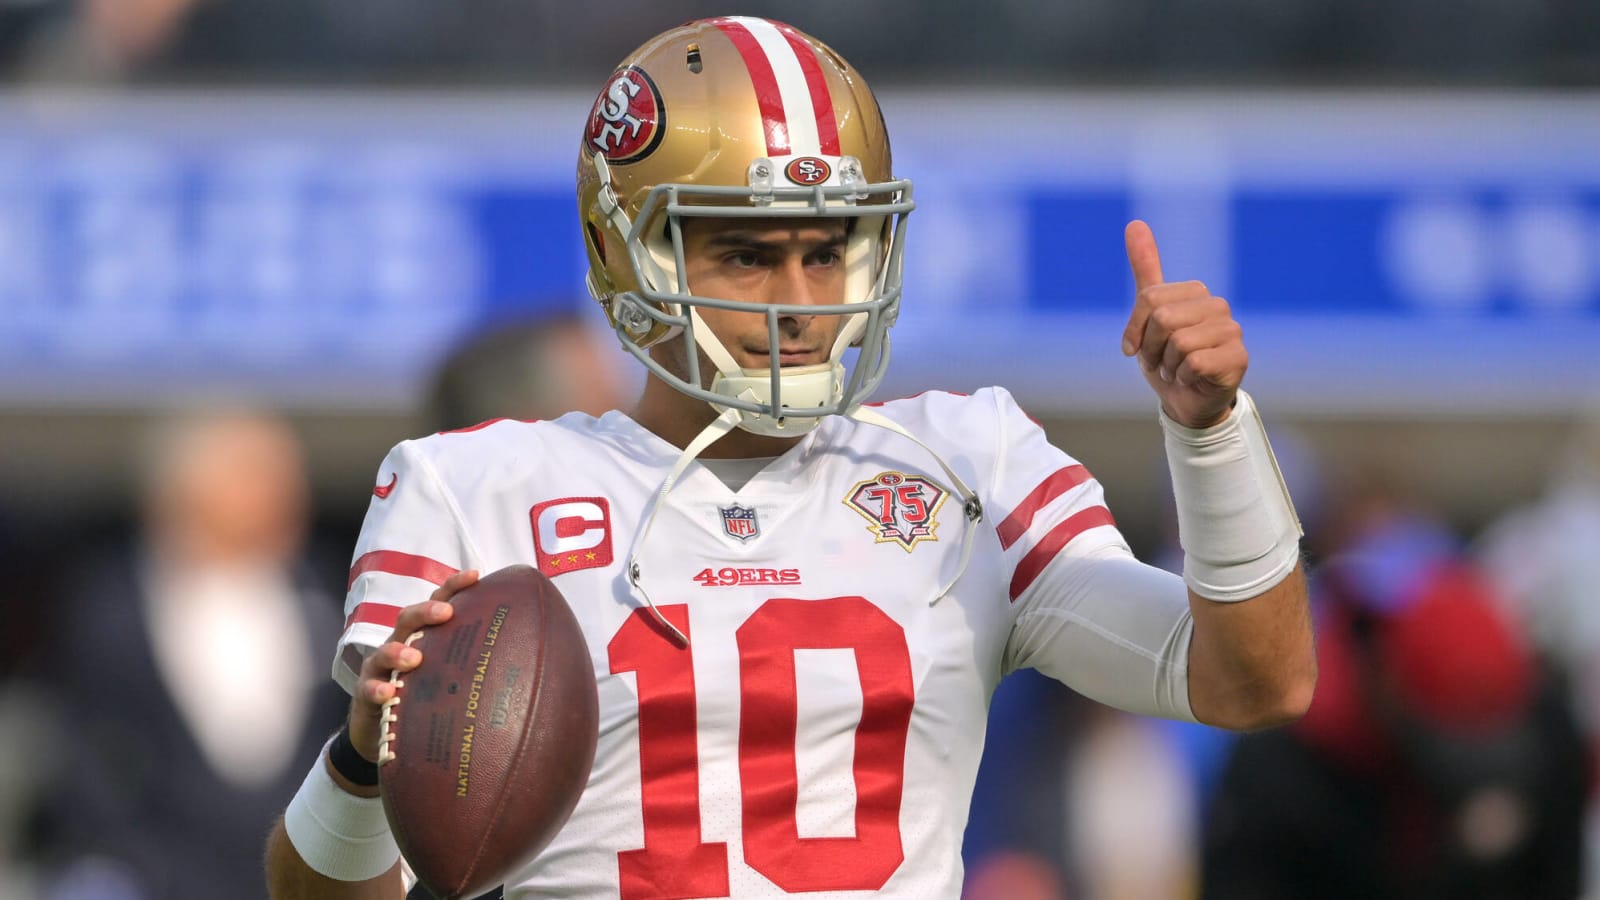 What is the most likely landing destination for Jimmy Garoppolo?